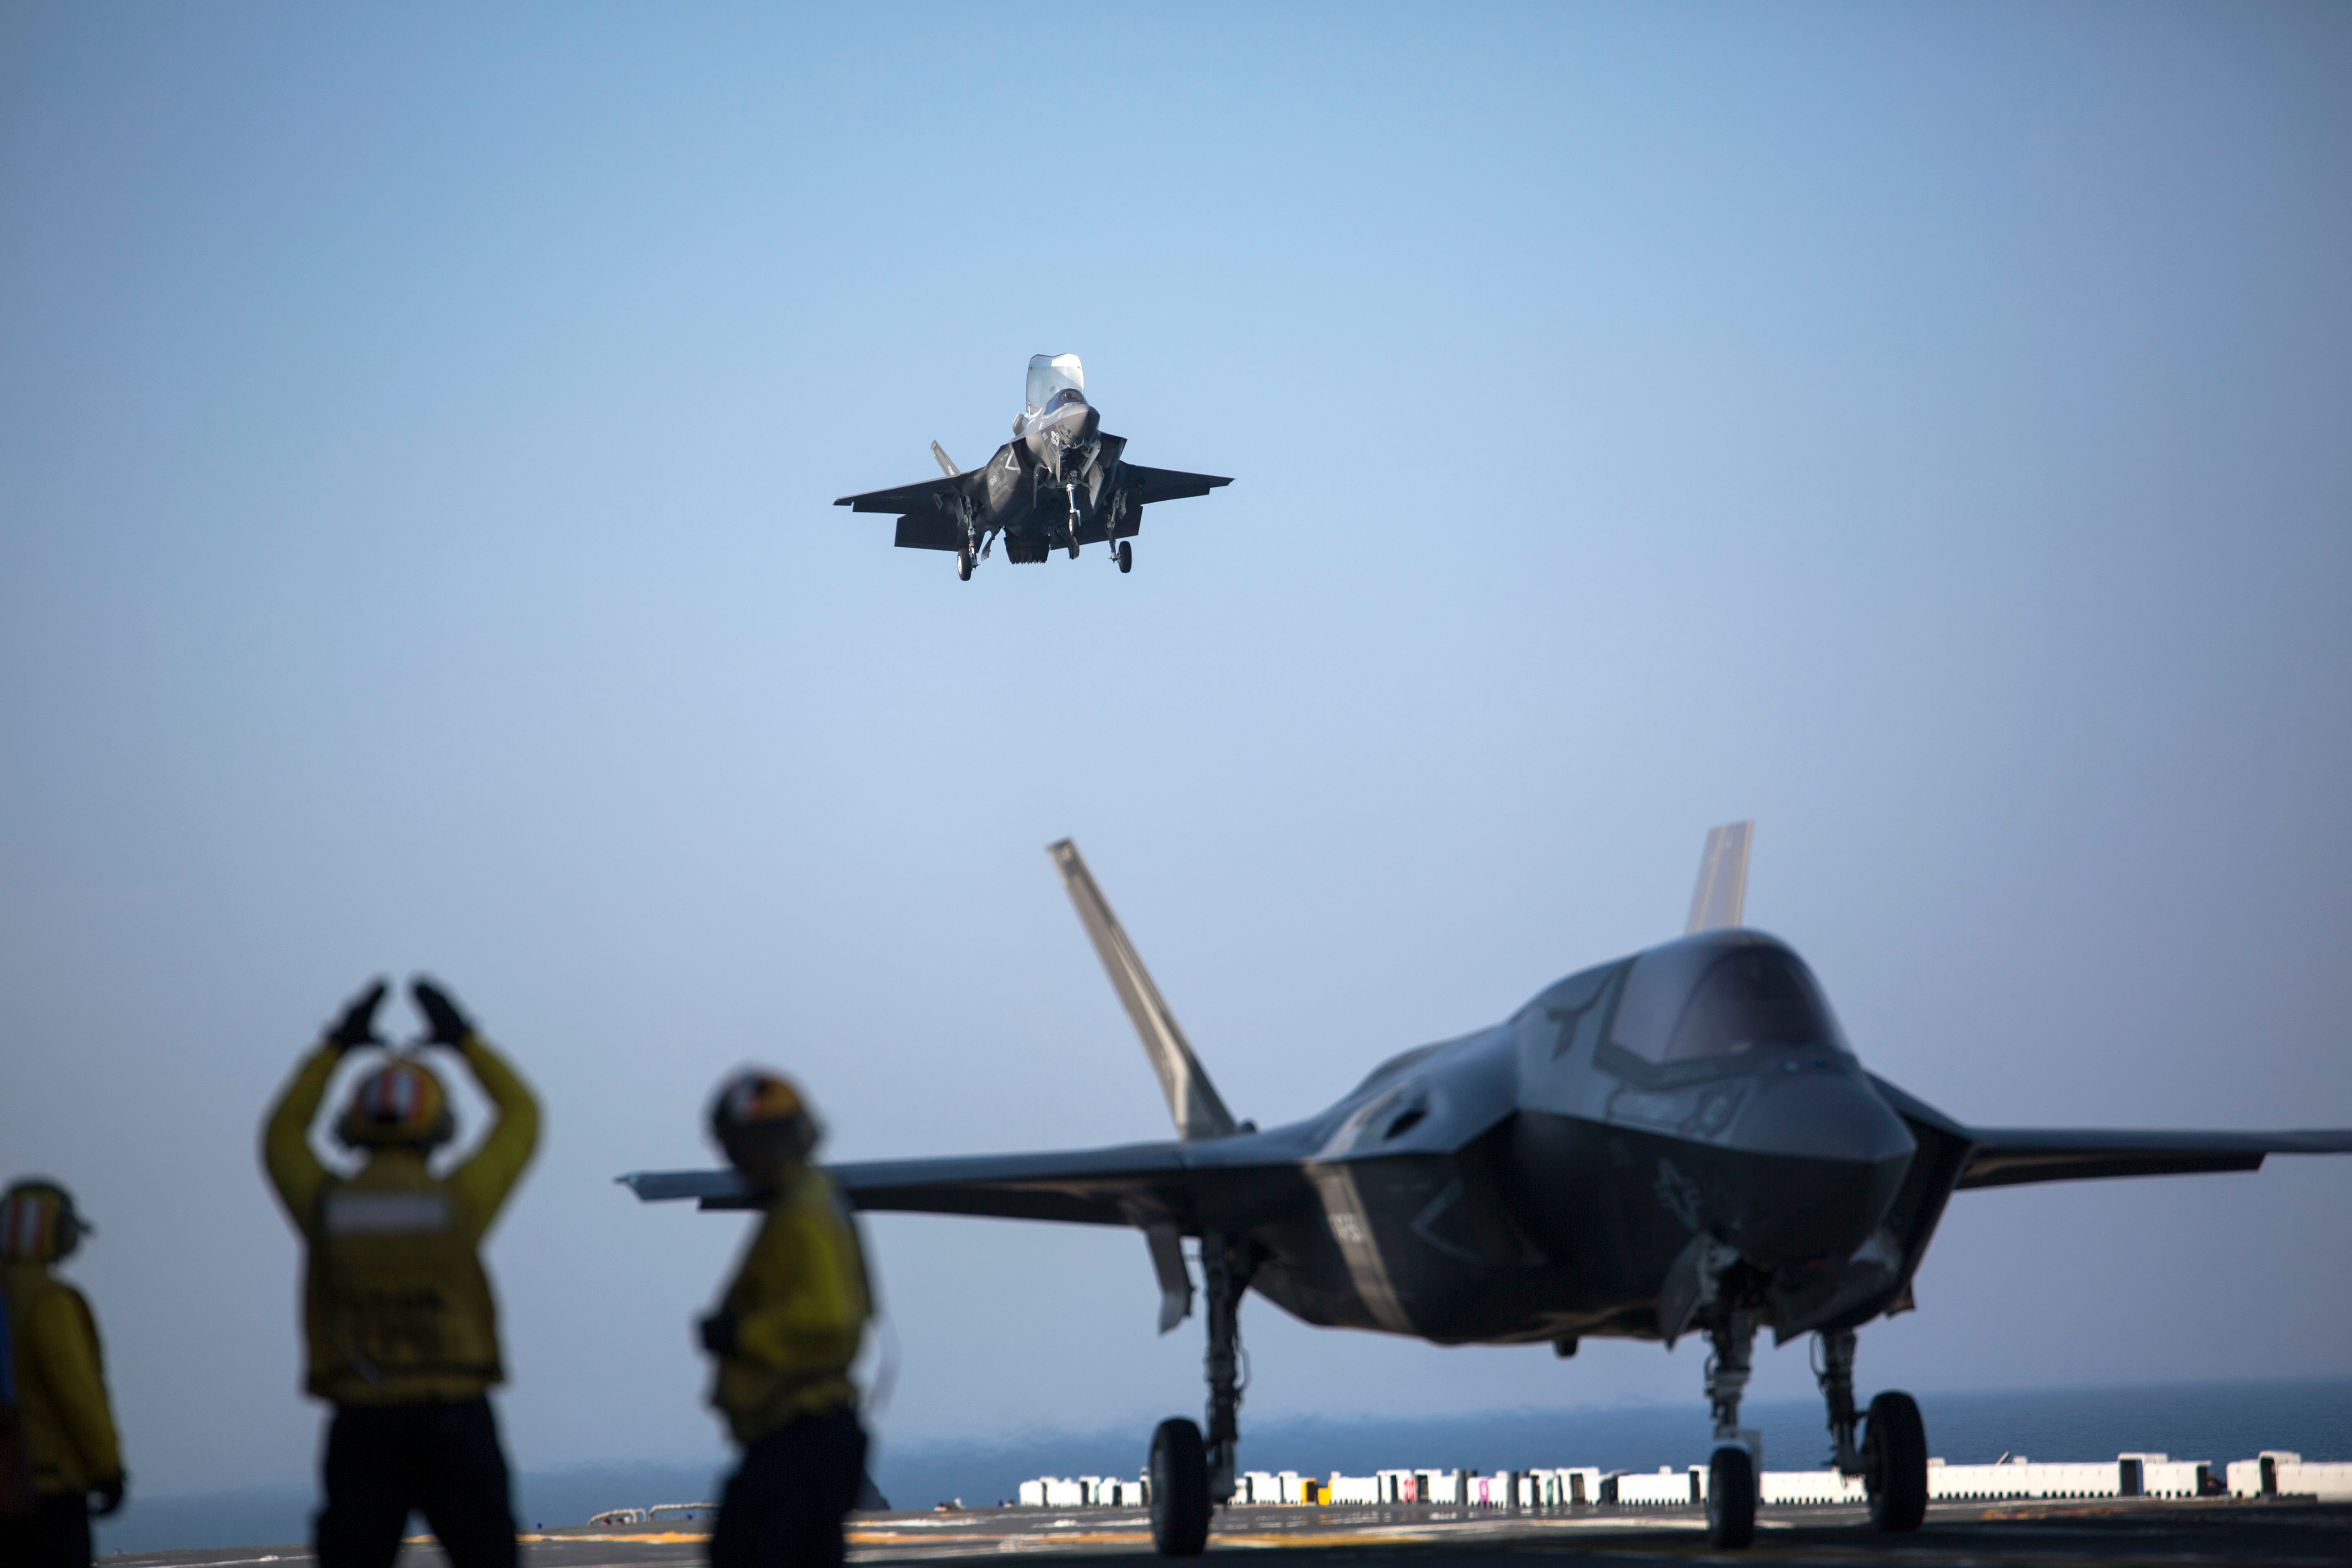 A sailor aboard the USS Wasp (LHD-1) signals to the pilot of an F-35B Lightning II Joint Strike Fighter to land as it arrives for the first phase of operational testing, May 18, 2015. US Marine Corps photo.